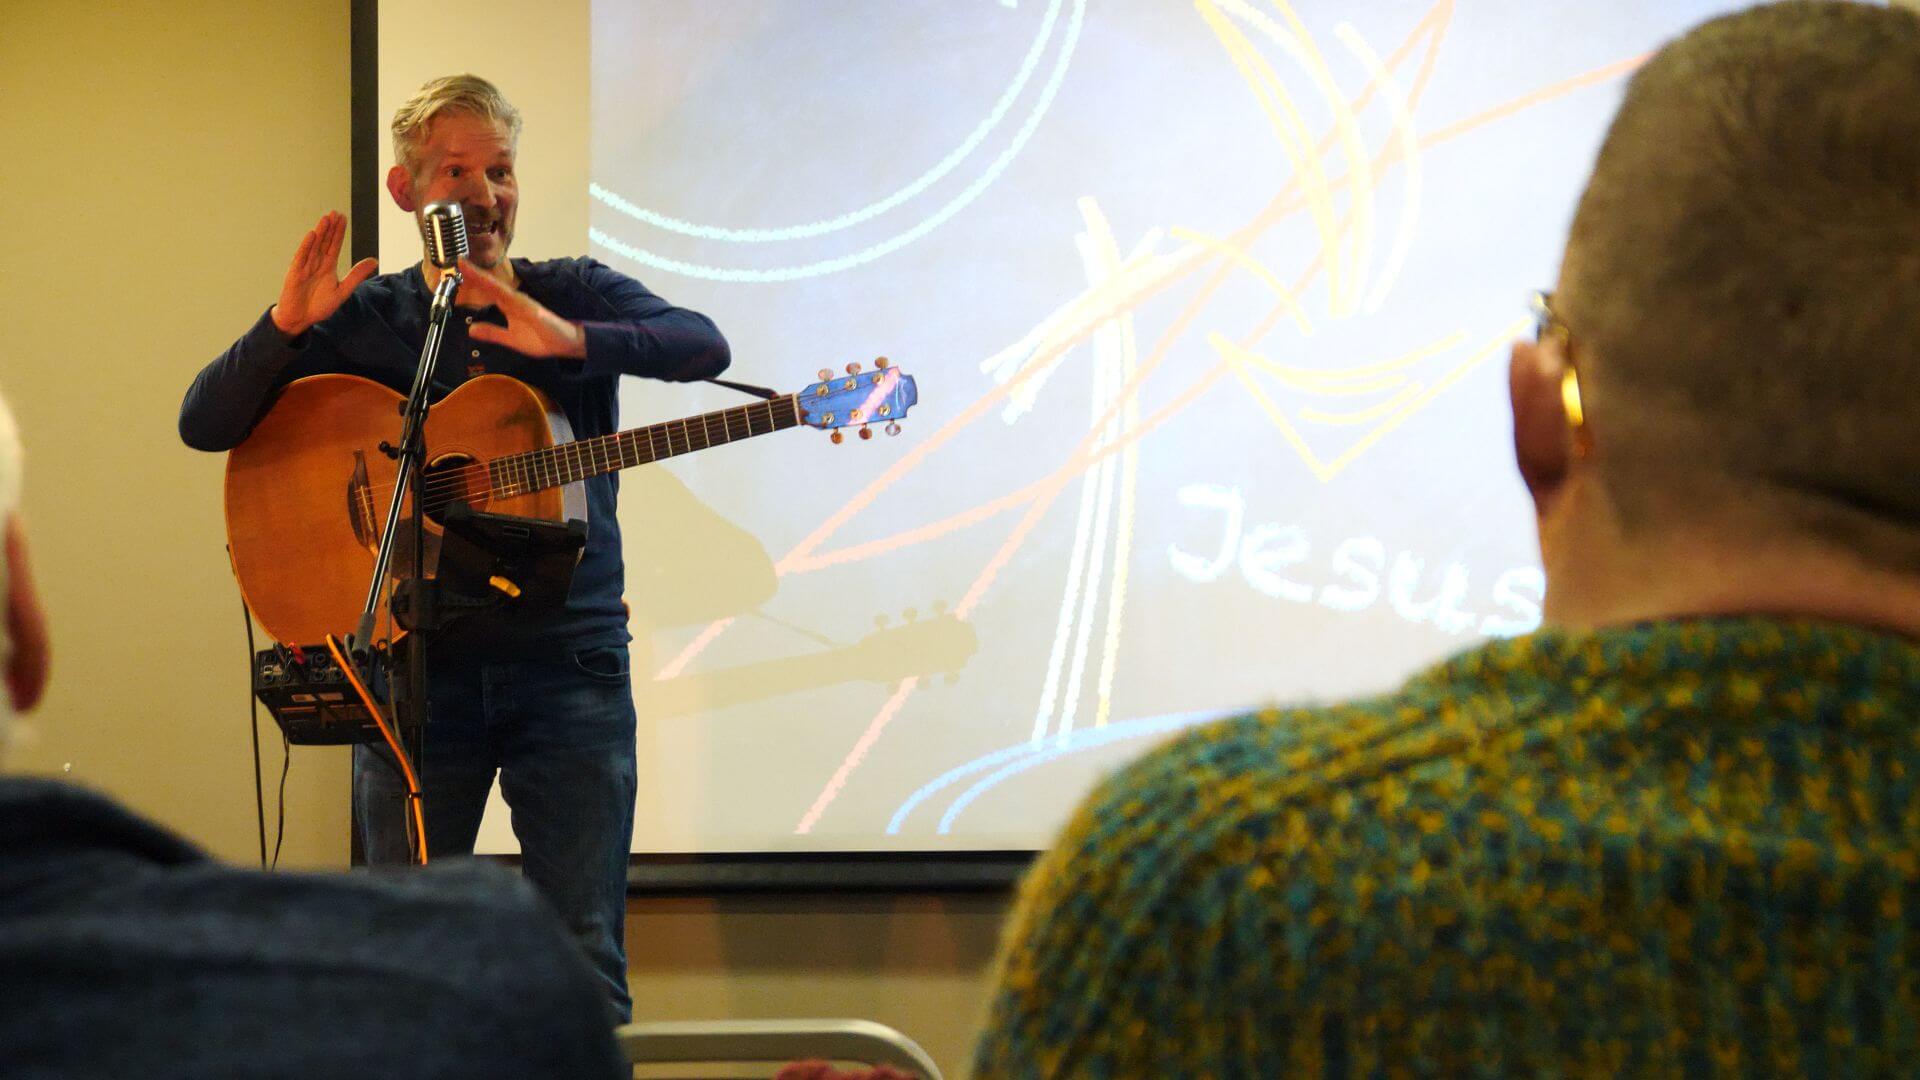 Man with a guitar presenting at a Christian Ceremony